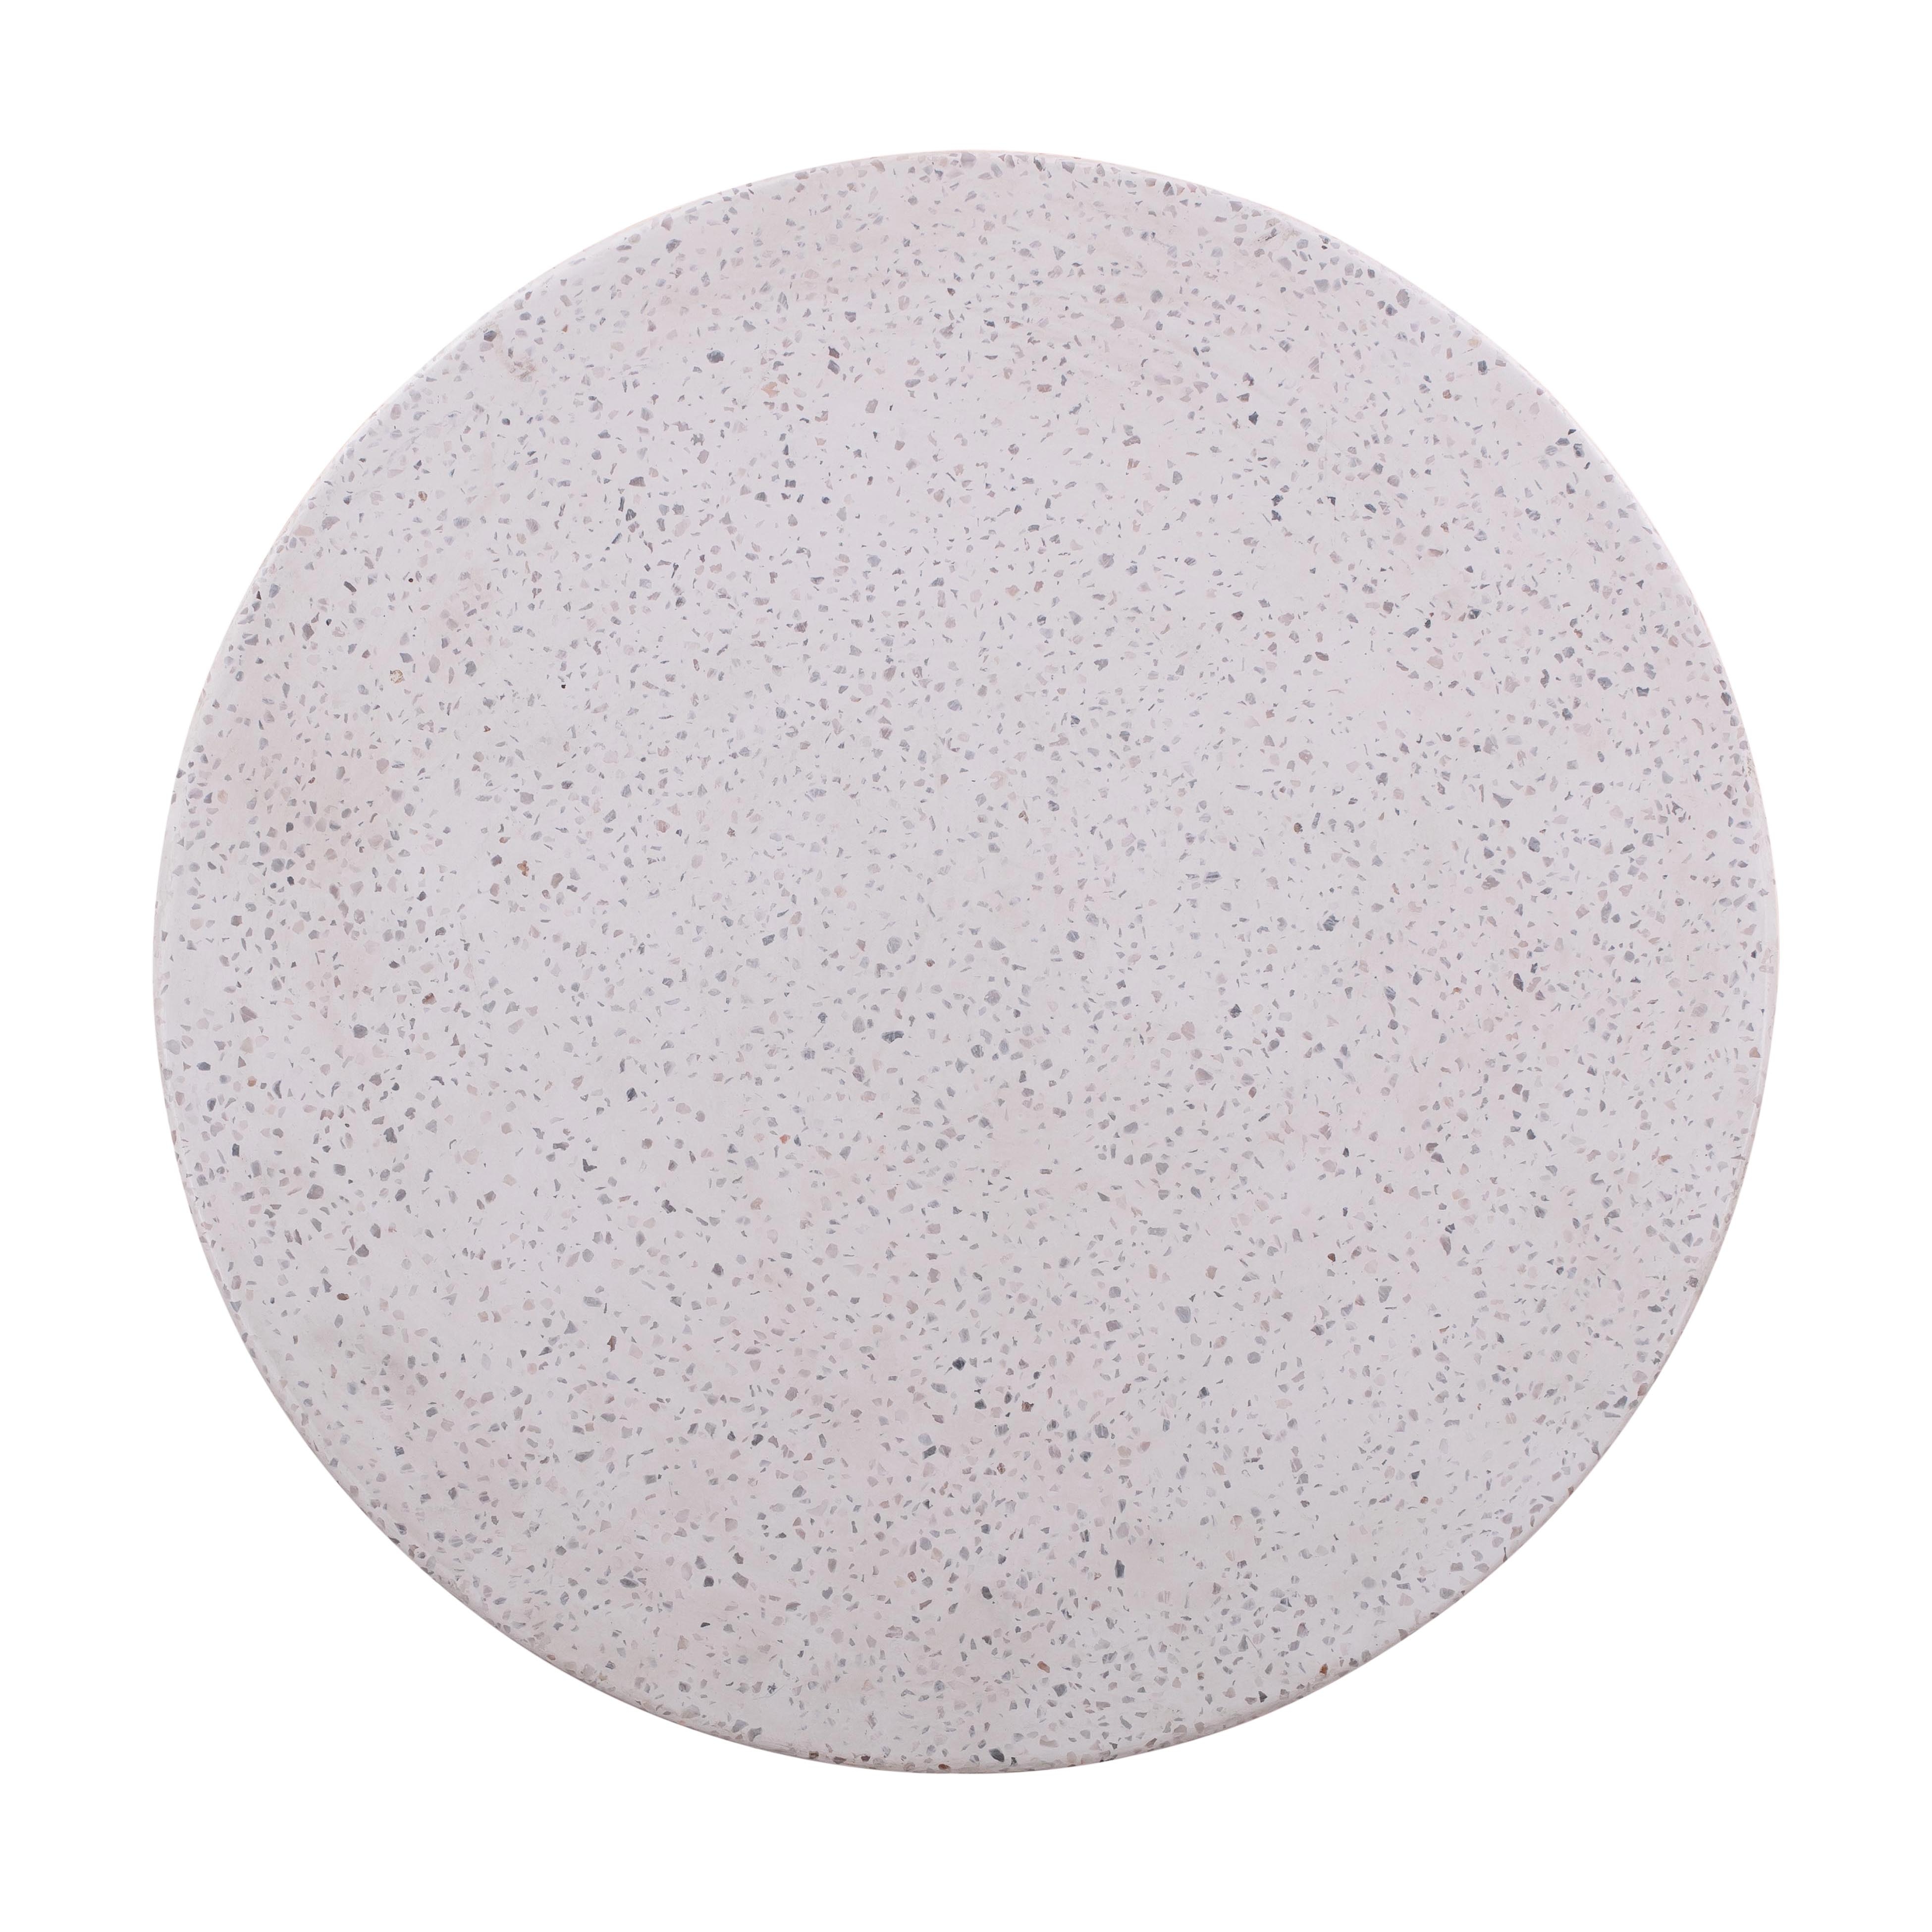 Terrazzo Light Speckled Side Table - Image 2